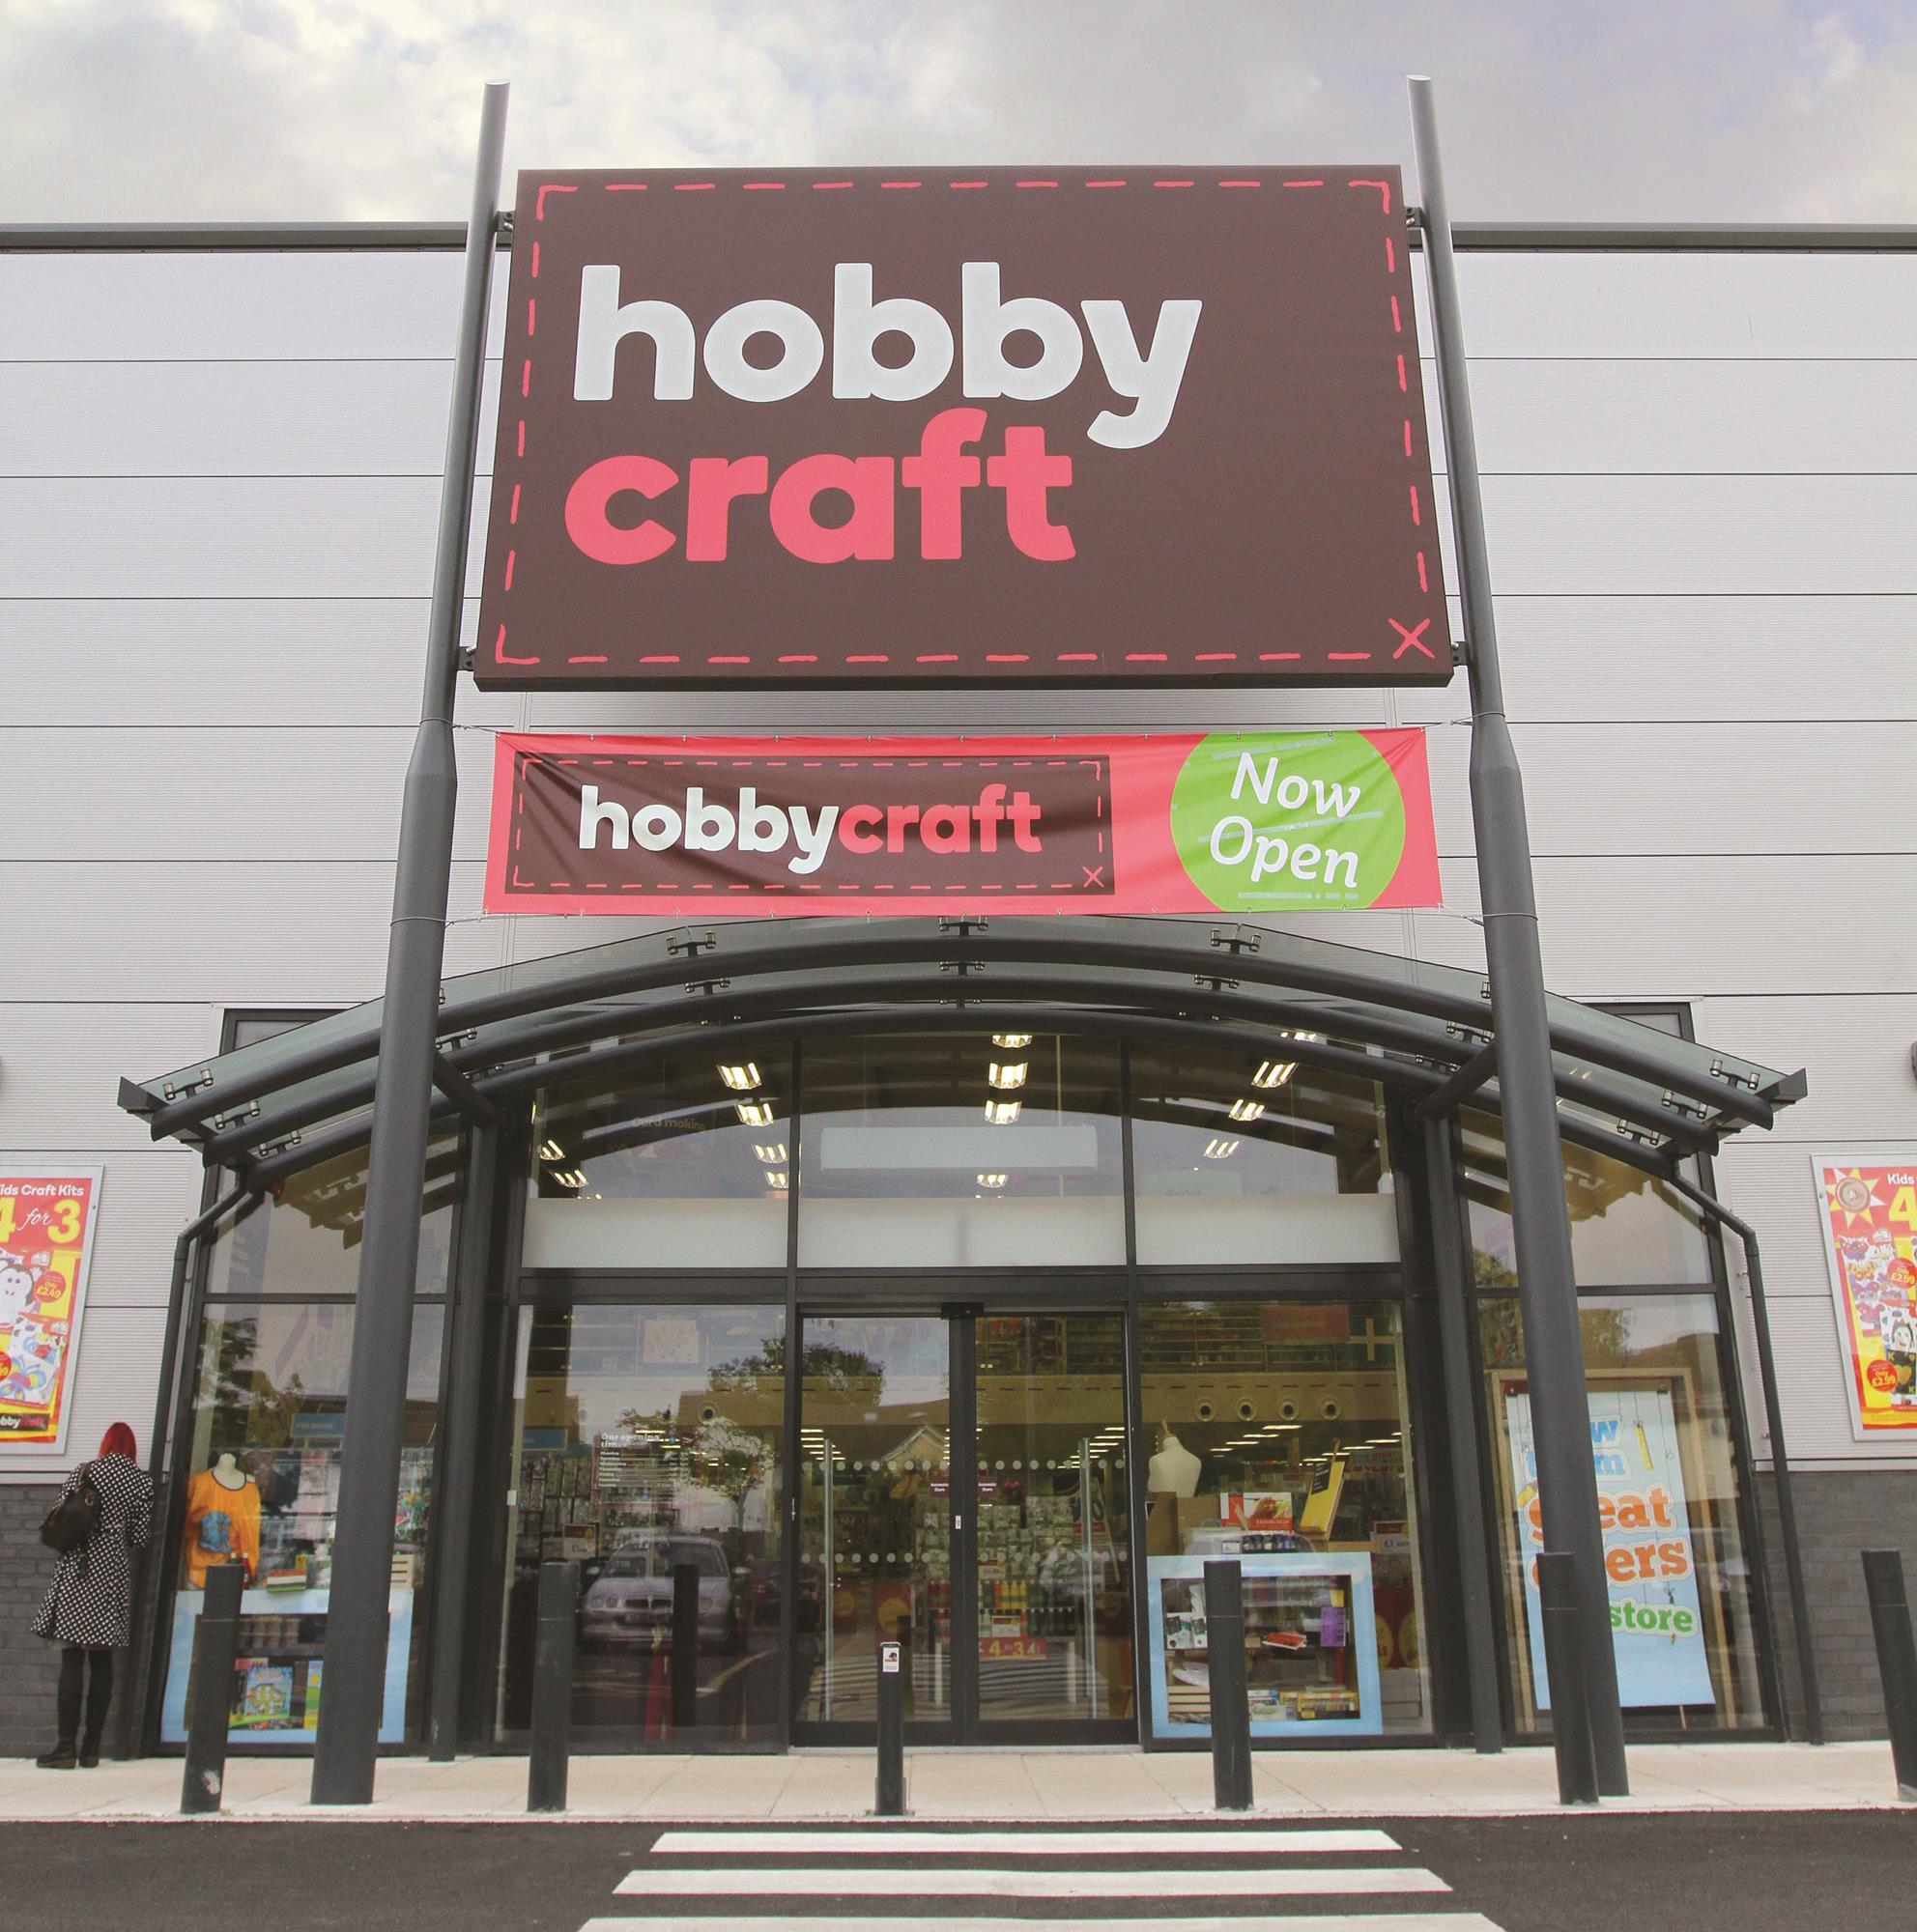 hobbycraft-targets-greater-london-with-roll-out-of-small-format-stores